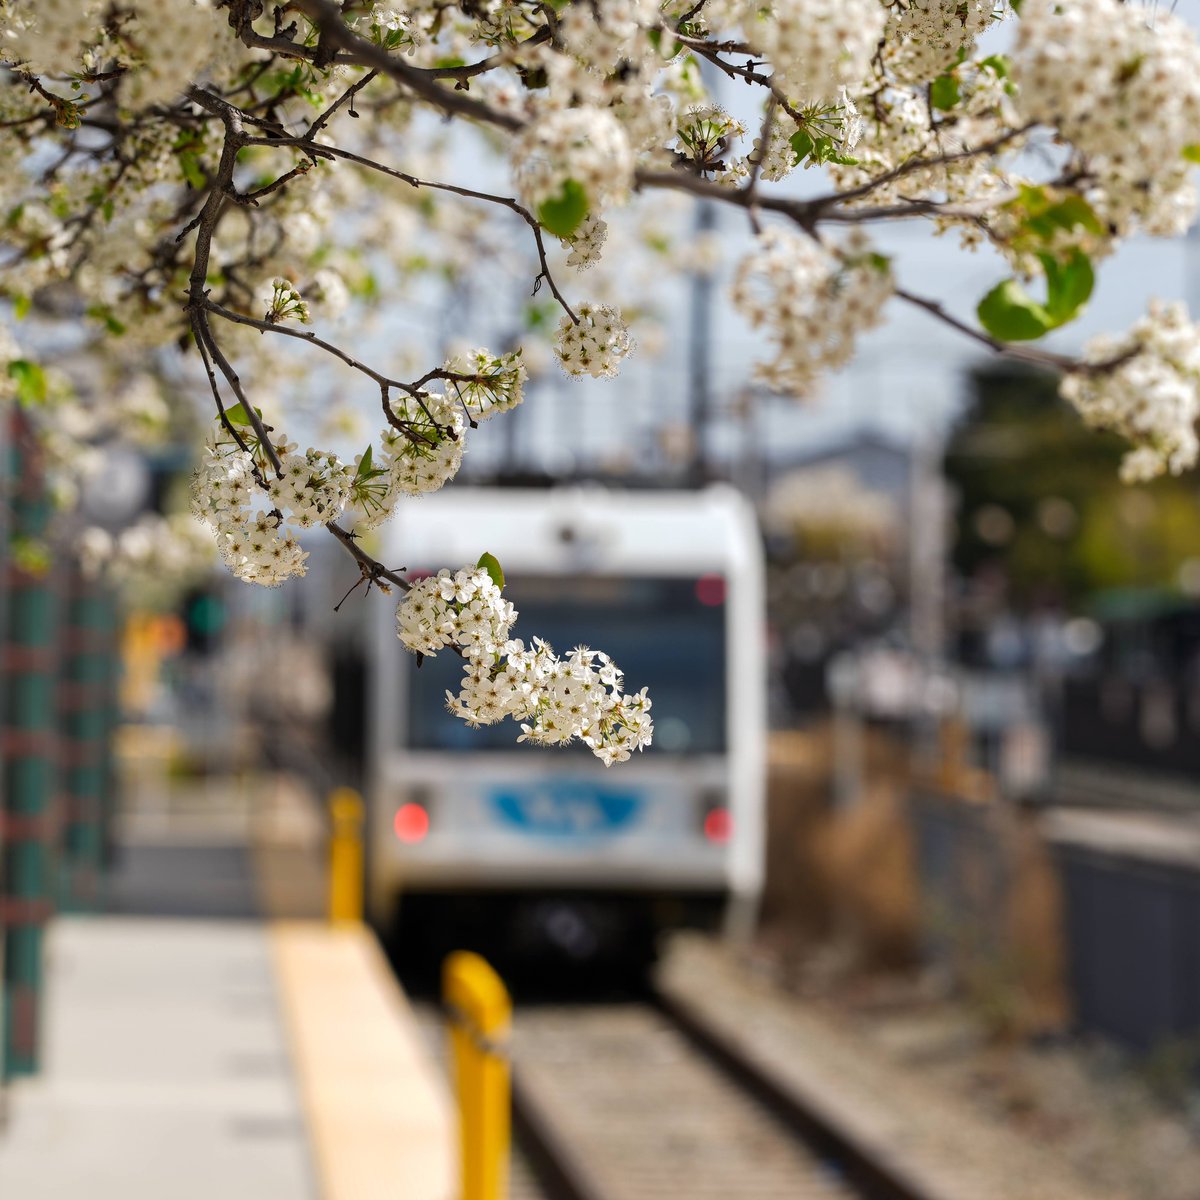 As part of our ongoing celebration of #EarthDay we congratulate @VTA on being named an FTA Champion of the Challenge! SCVTA analyzed emissions forecasts & vulnerability assessments, resulting in several emission reduction & climate adaptation measures. tinyurl.com/mu54h2bx